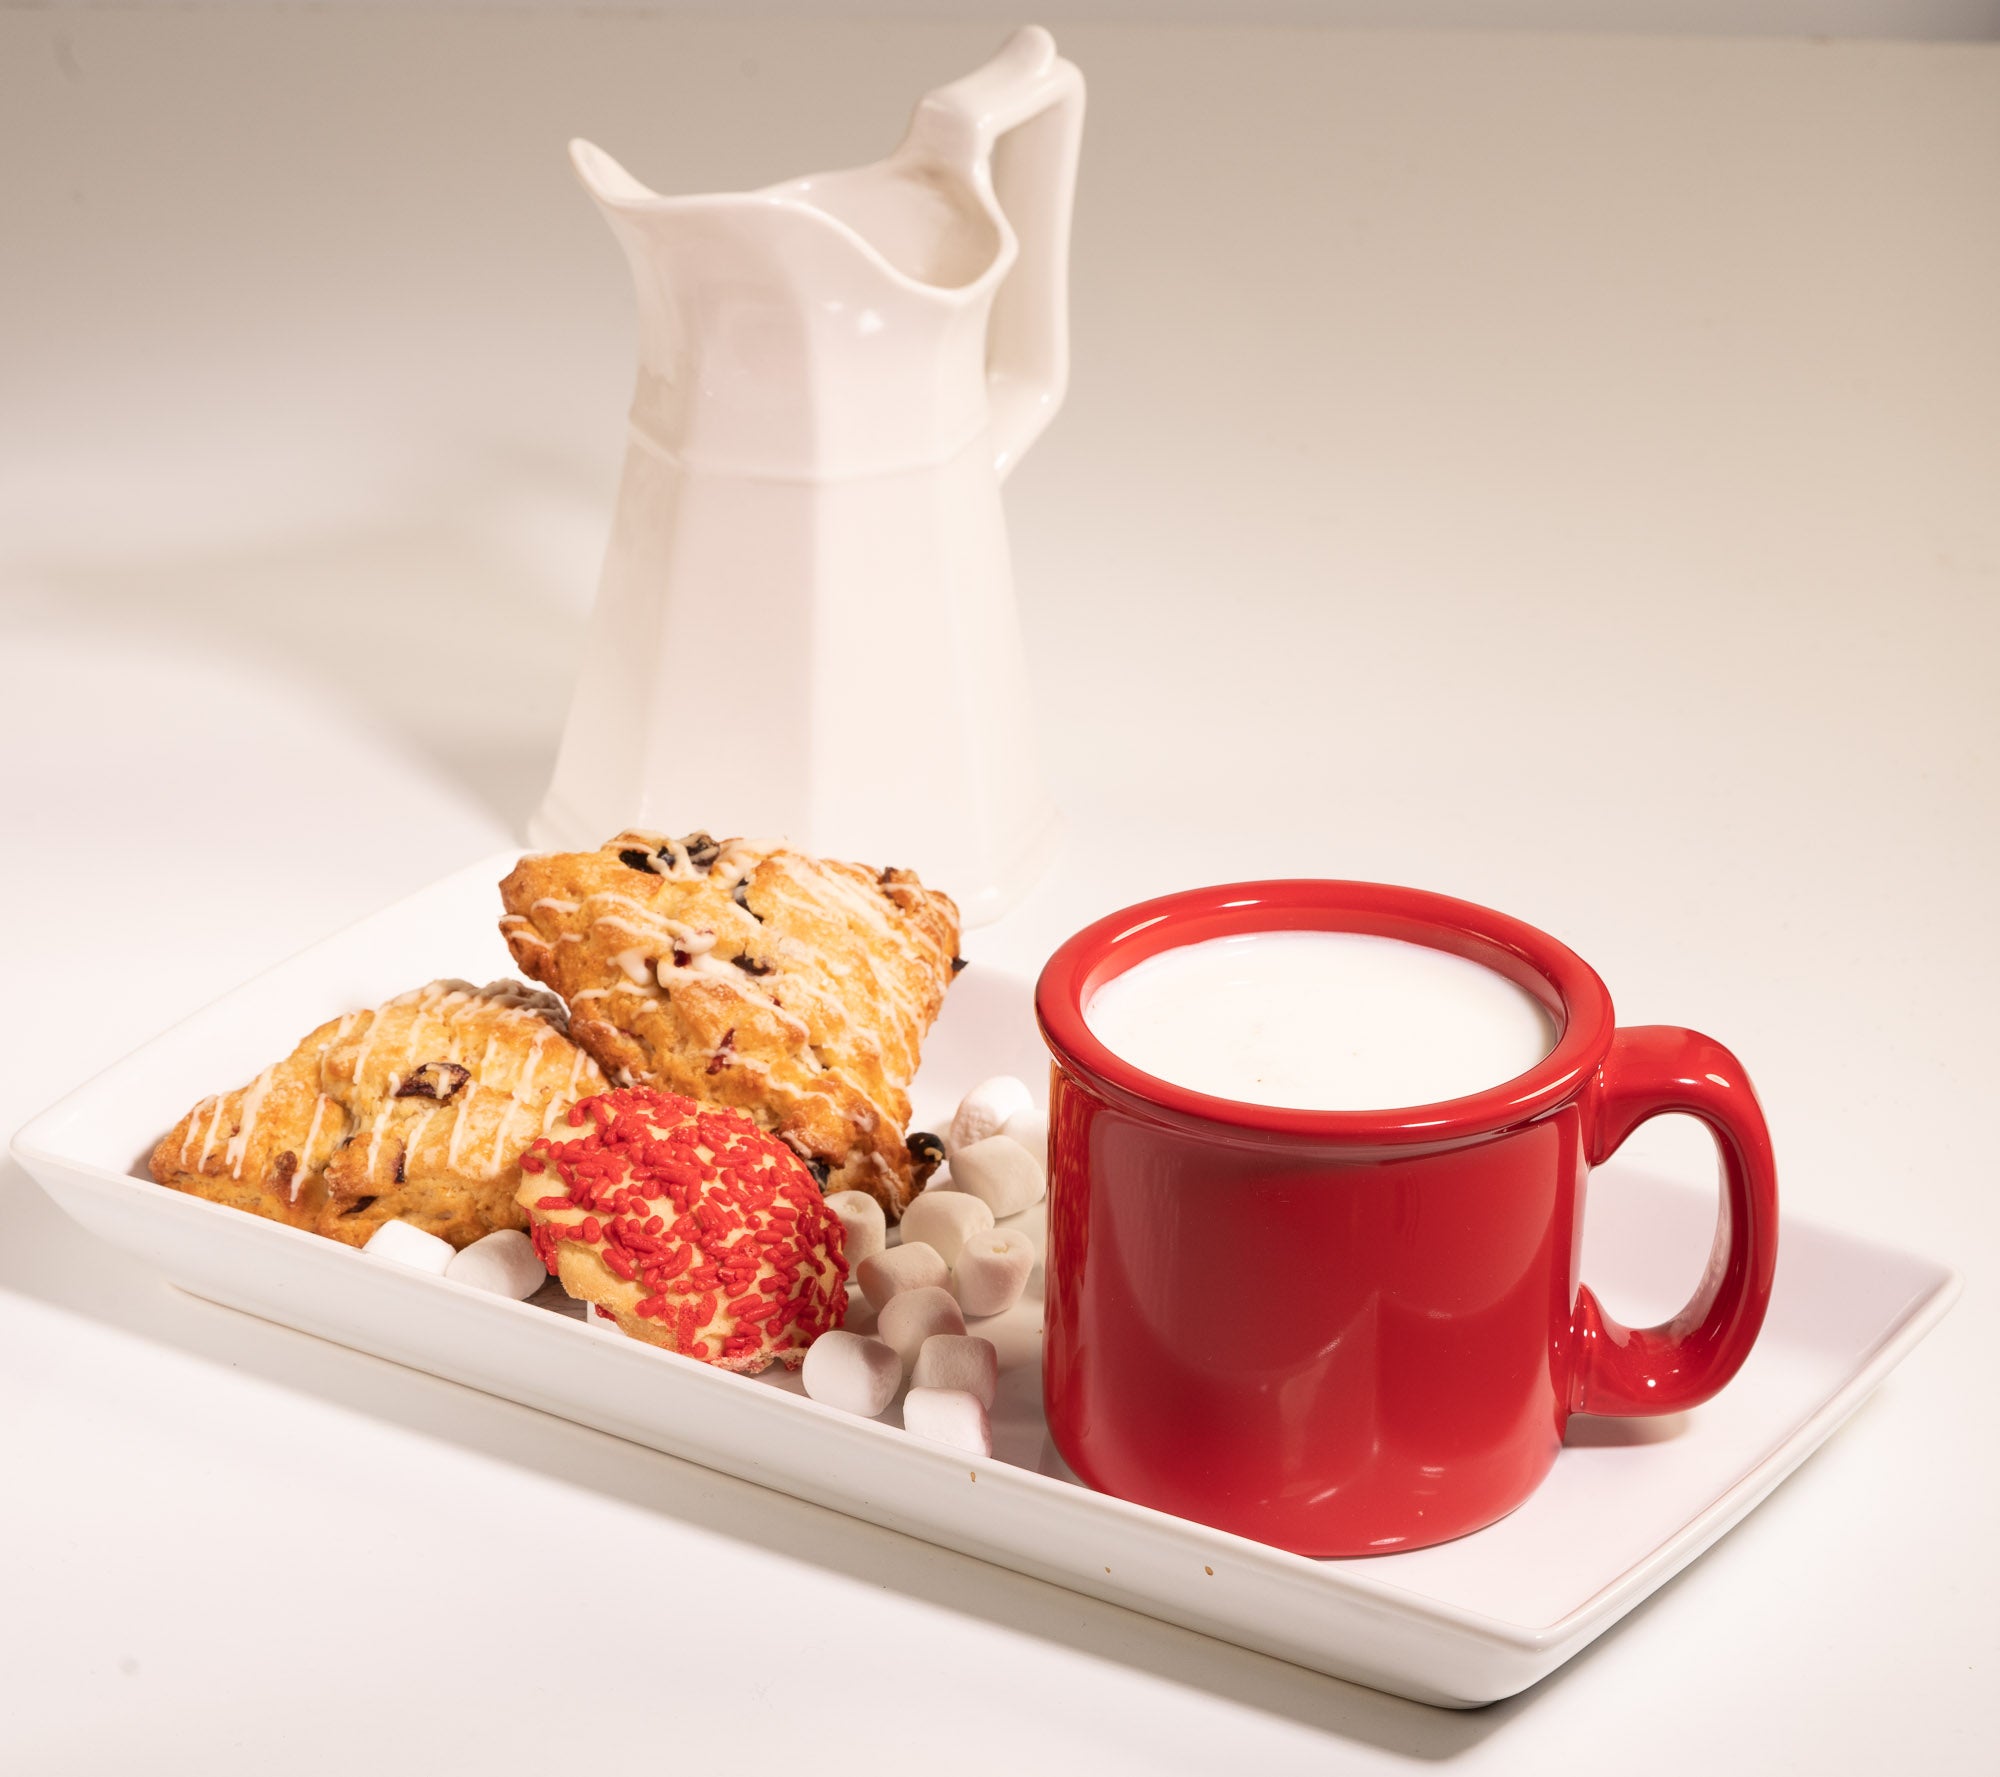 Ceramic Tea/Coffee cup with hot plate